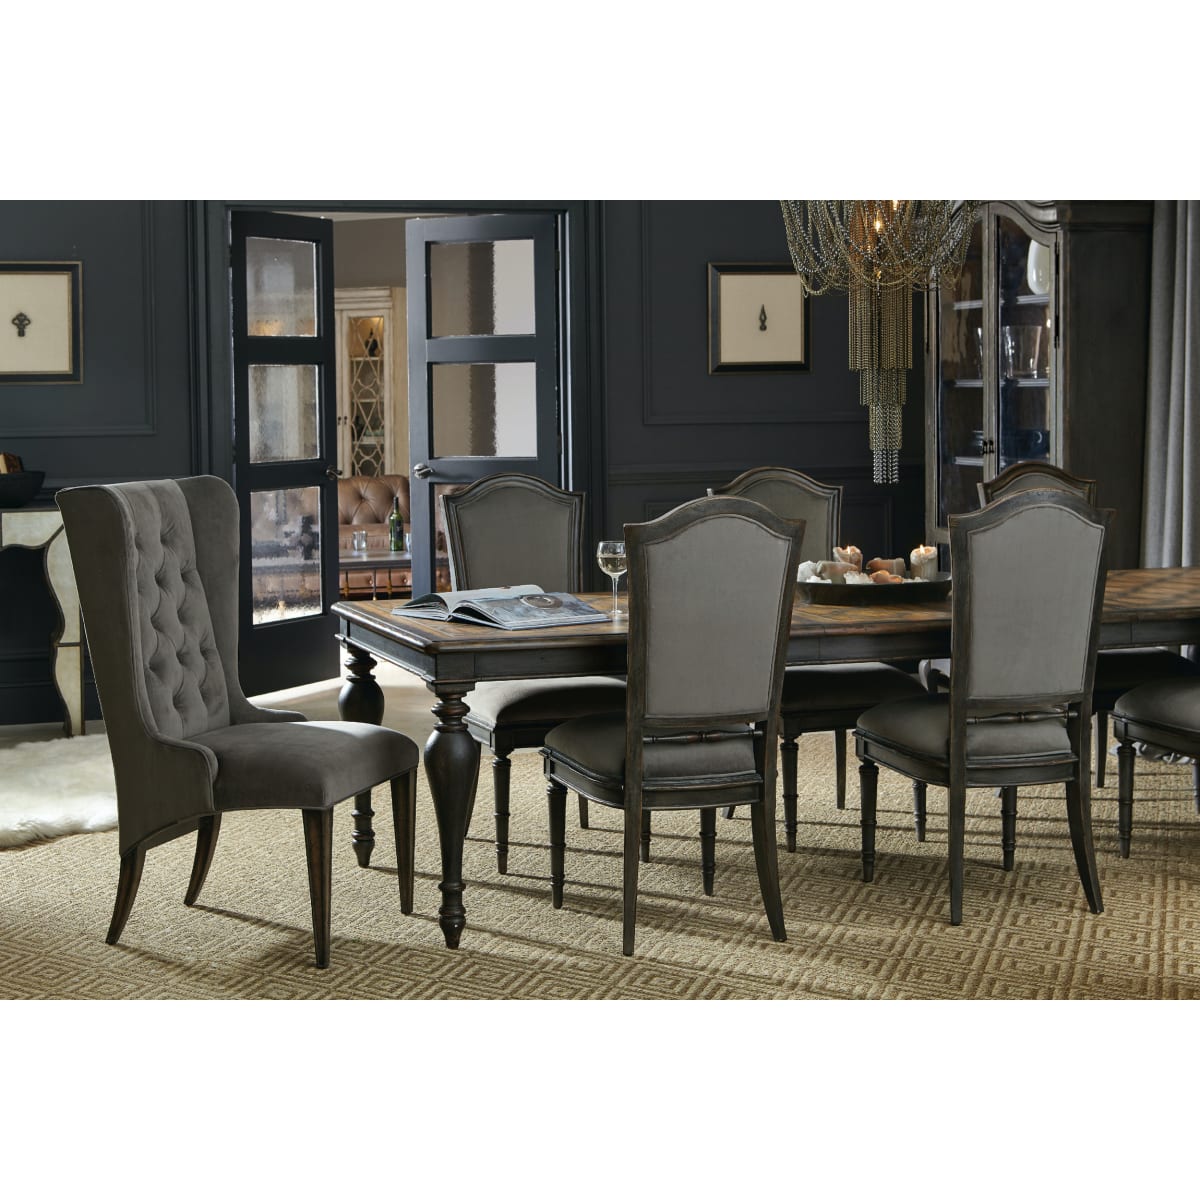 Furniture 1610 75207 Multi, 120 Long Dining Room Table